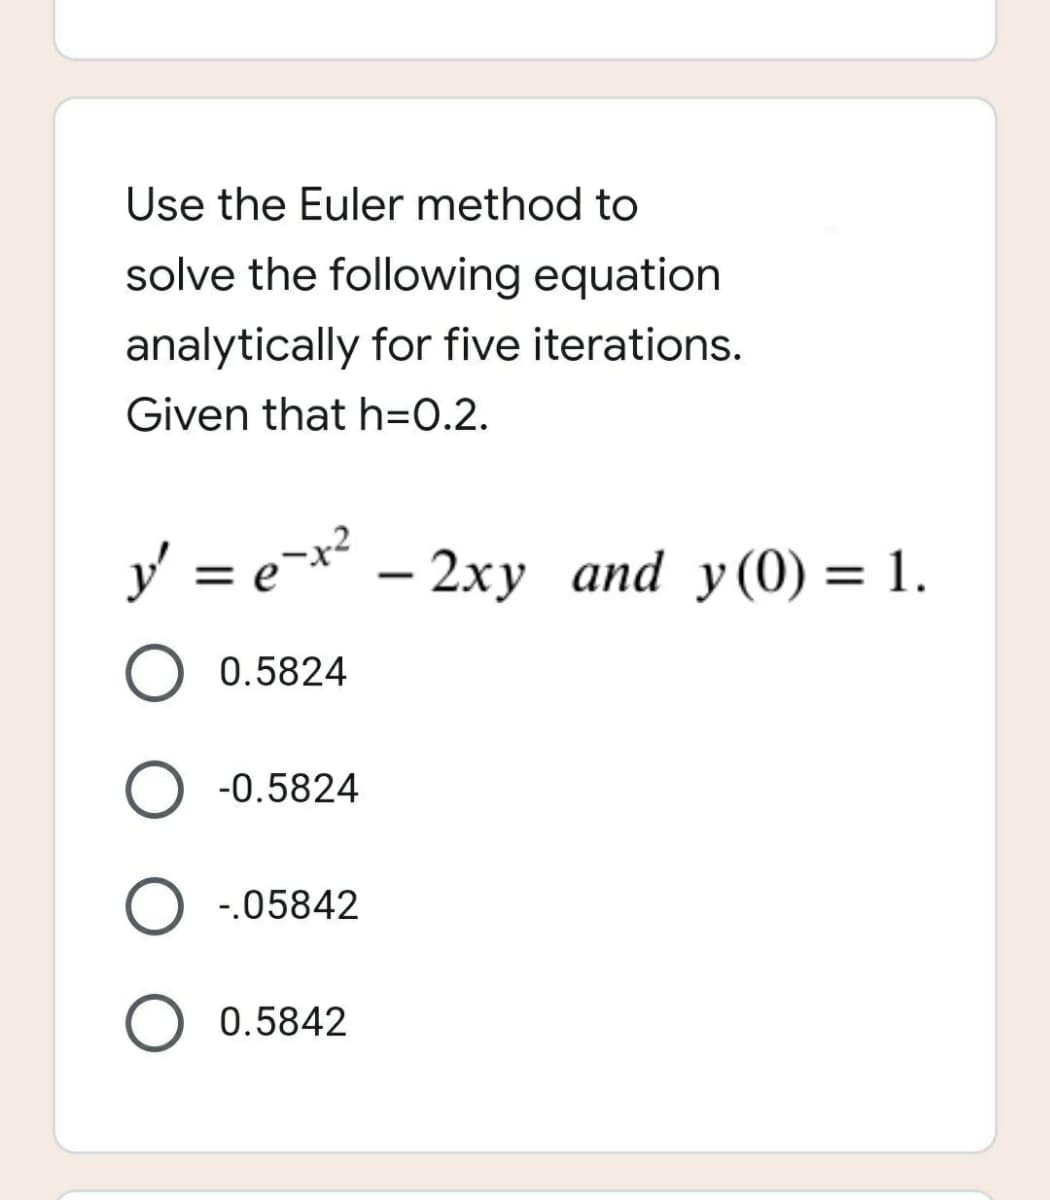 Use the Euler method to
solve the following equation
analytically for five iterations.
Given that h=0.2.
y' = e-x² - 2xy and y(0) = 1.
O 0.5824
-0.5824
O -.05842
O 0.5842